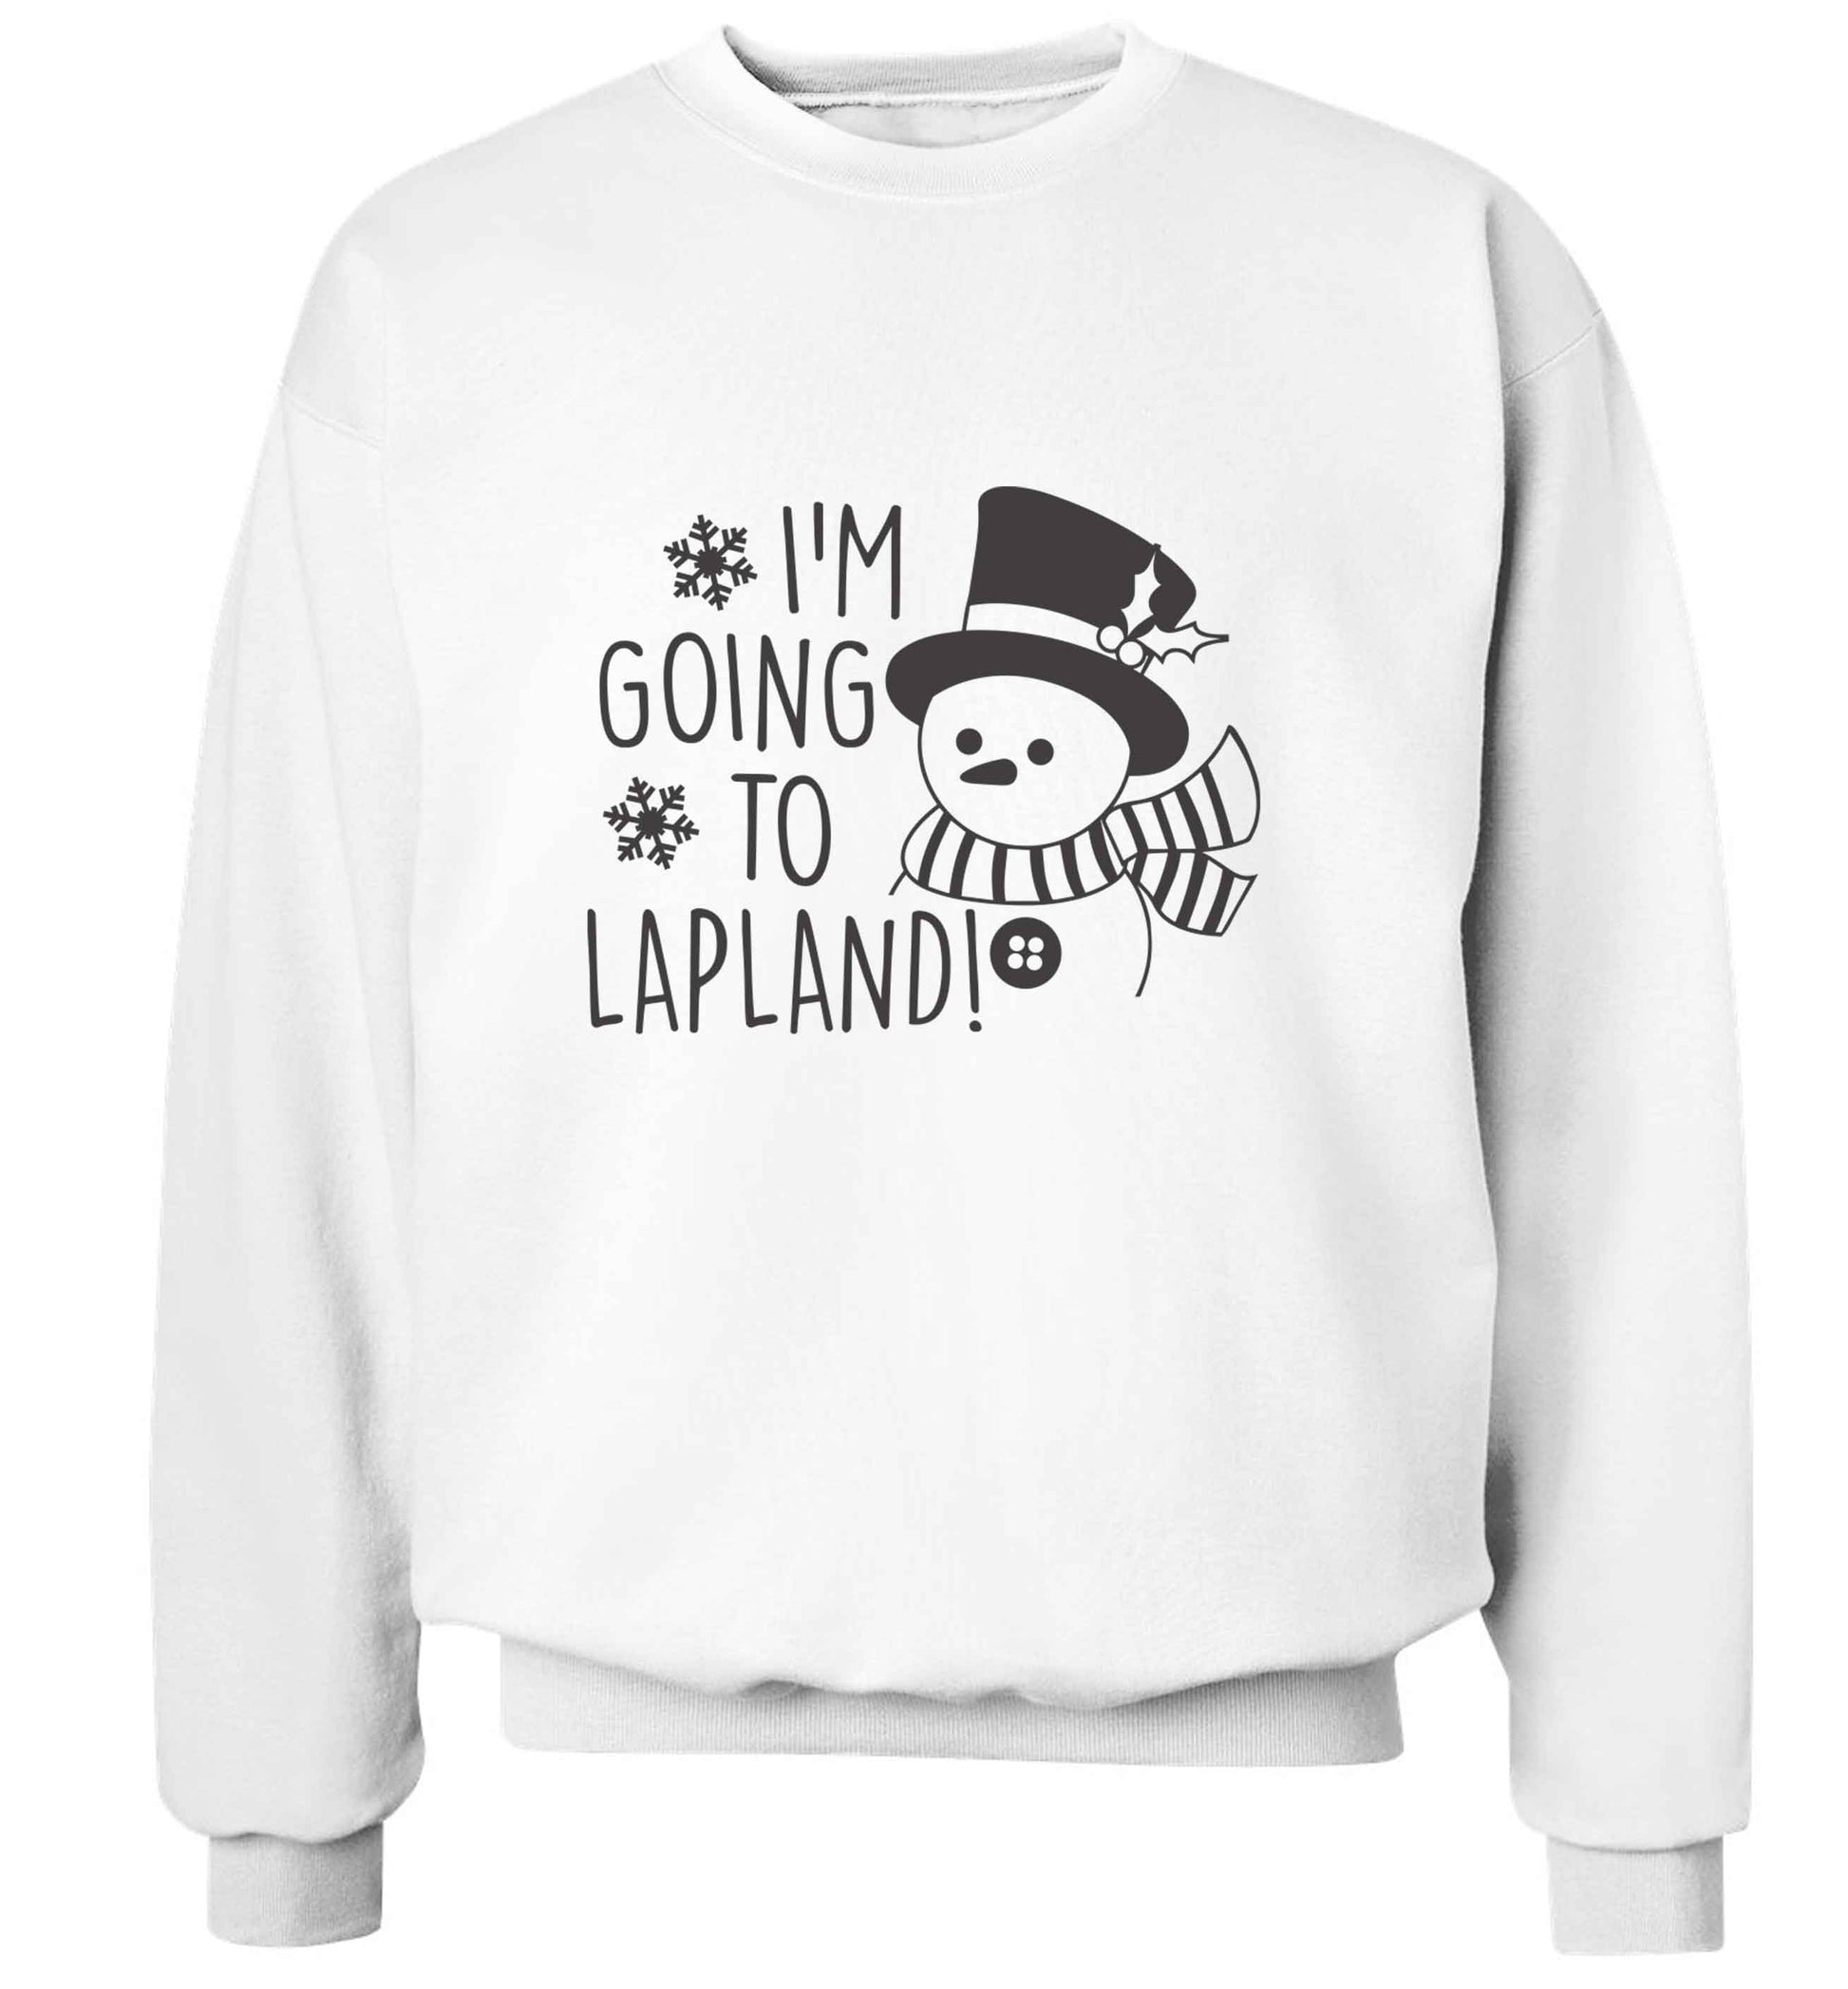 I'm going to Lapland adult's unisex white sweater 2XL